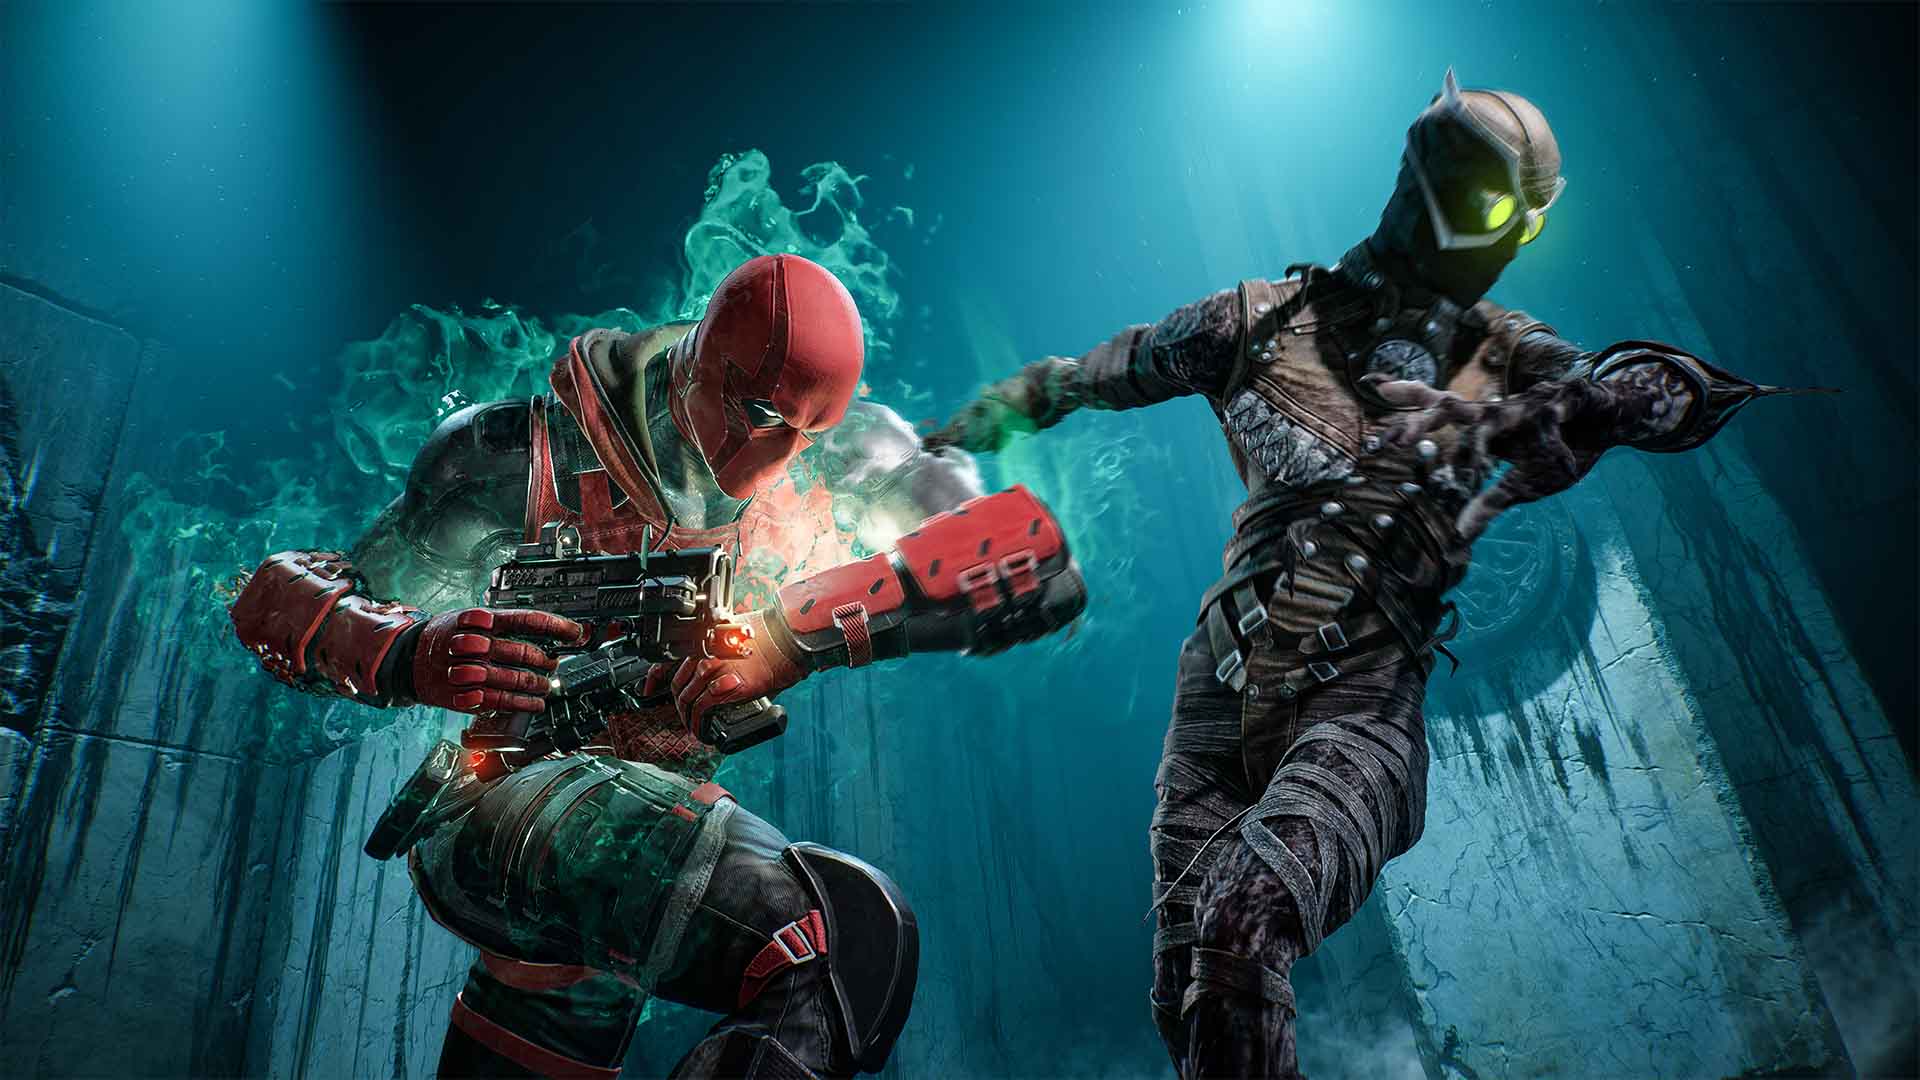 Robin gameplay trailer for Gotham Knights released